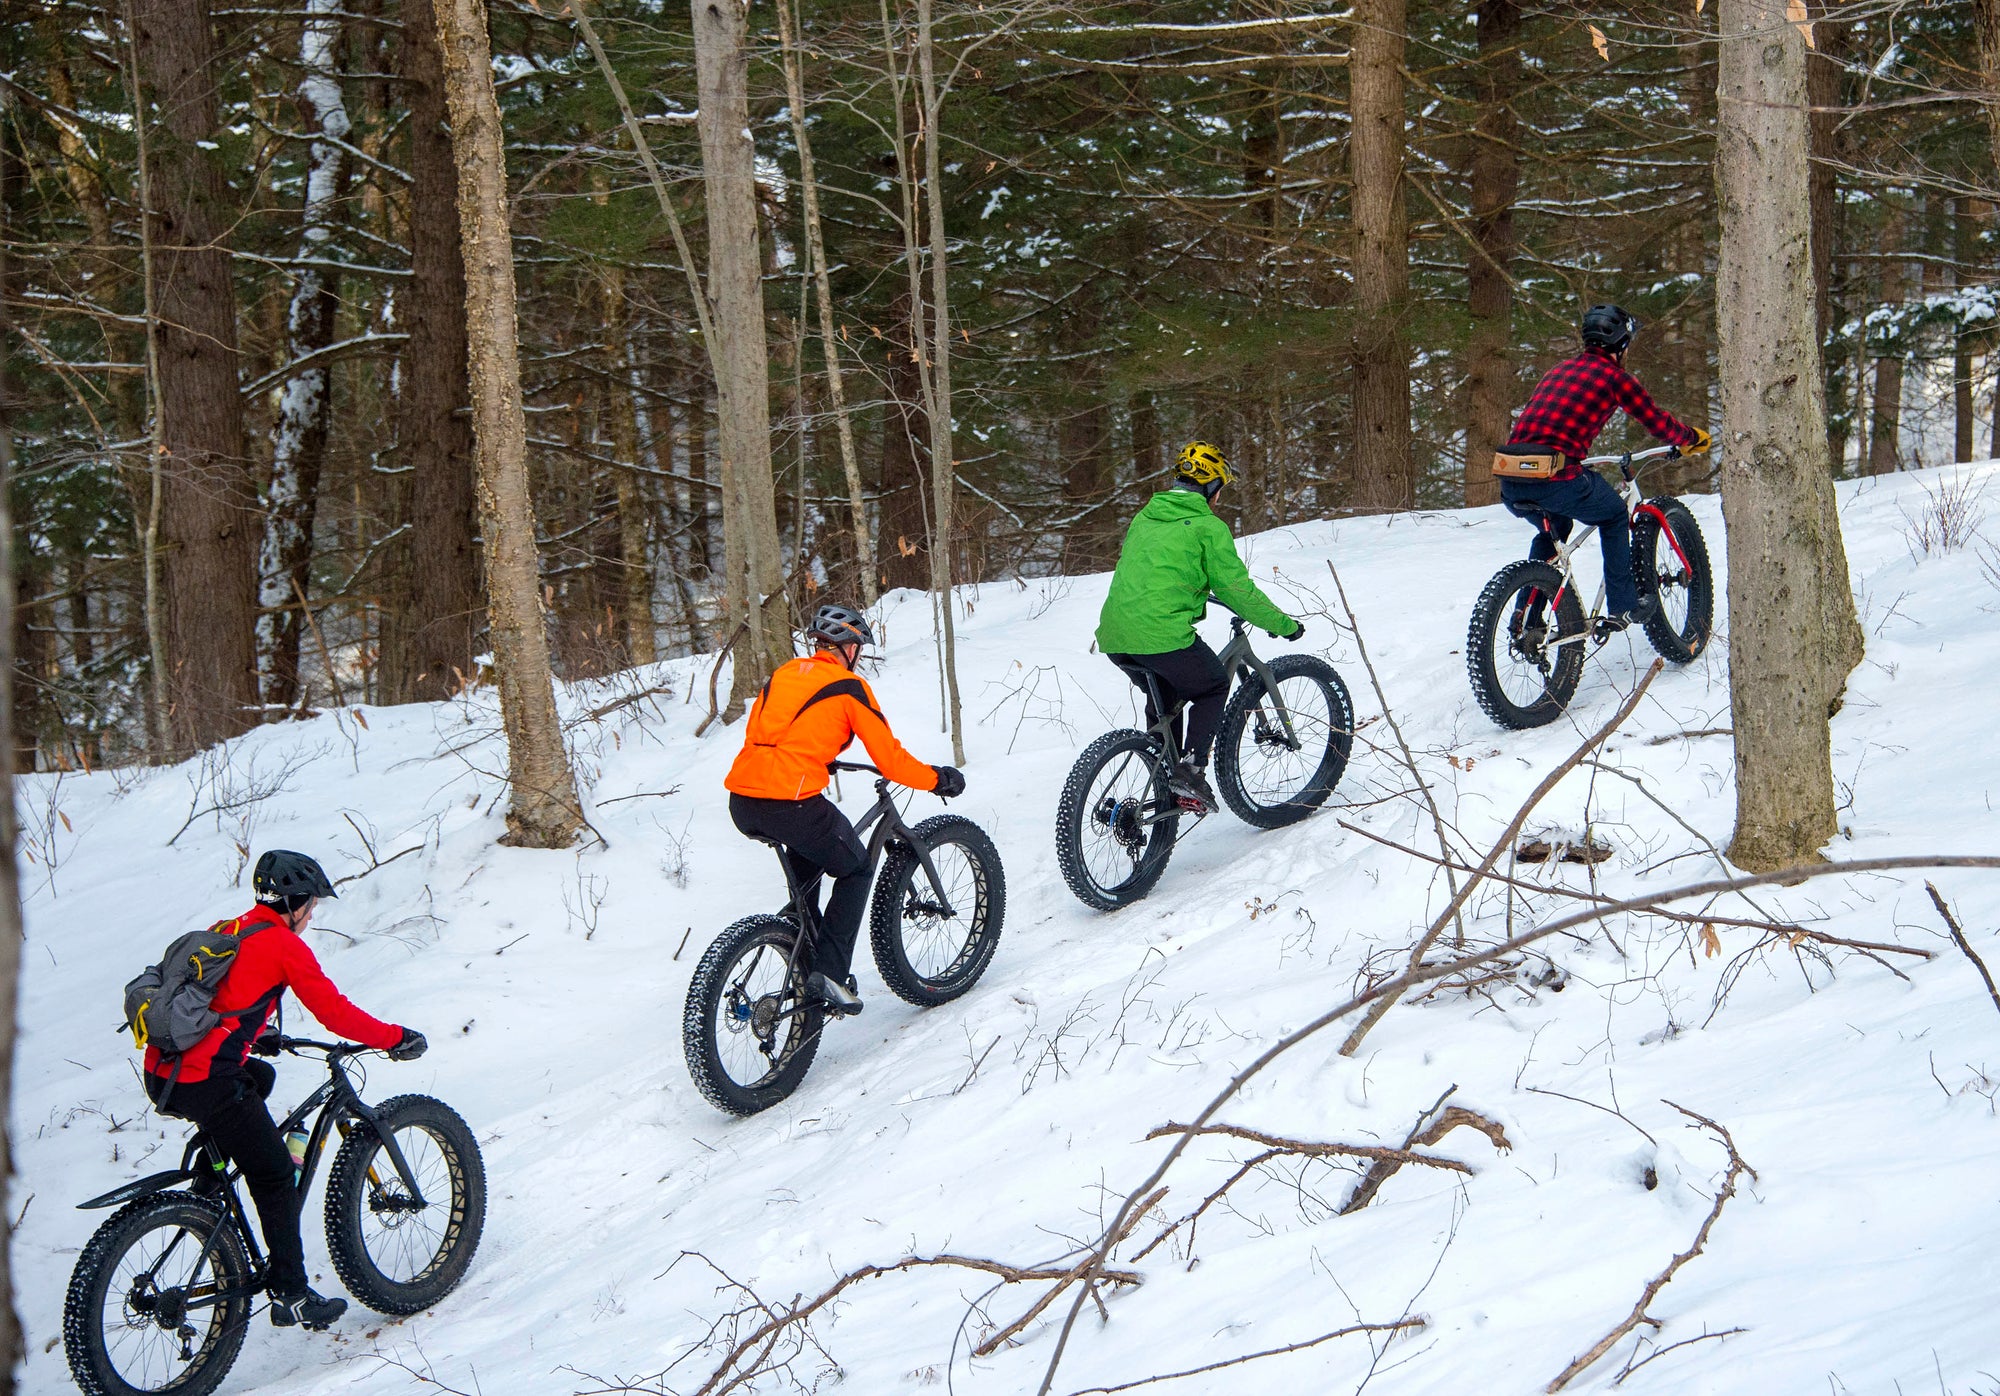 Four fat bikers in red, orange, green and plaid jackets riding on a snowy trail